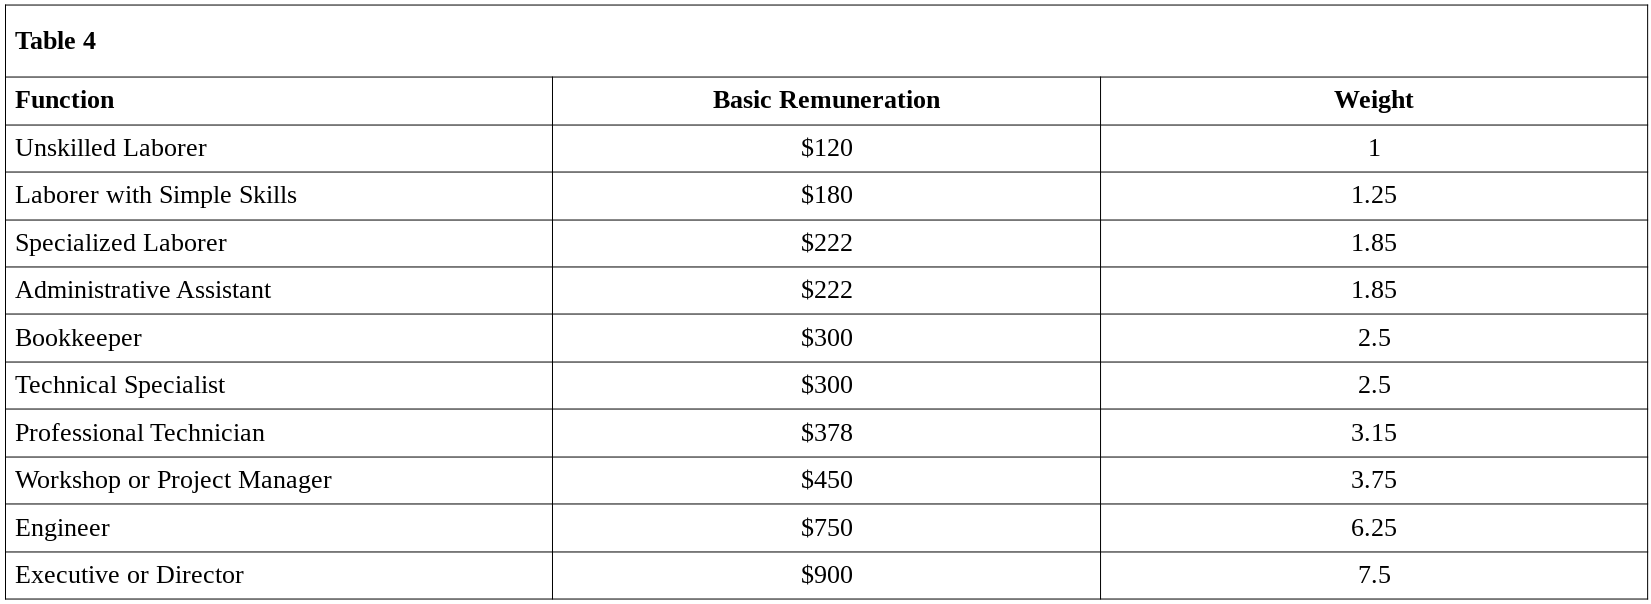 Table 4 - Showing labor time weights and basic remuneration for different job functions within the co-op.